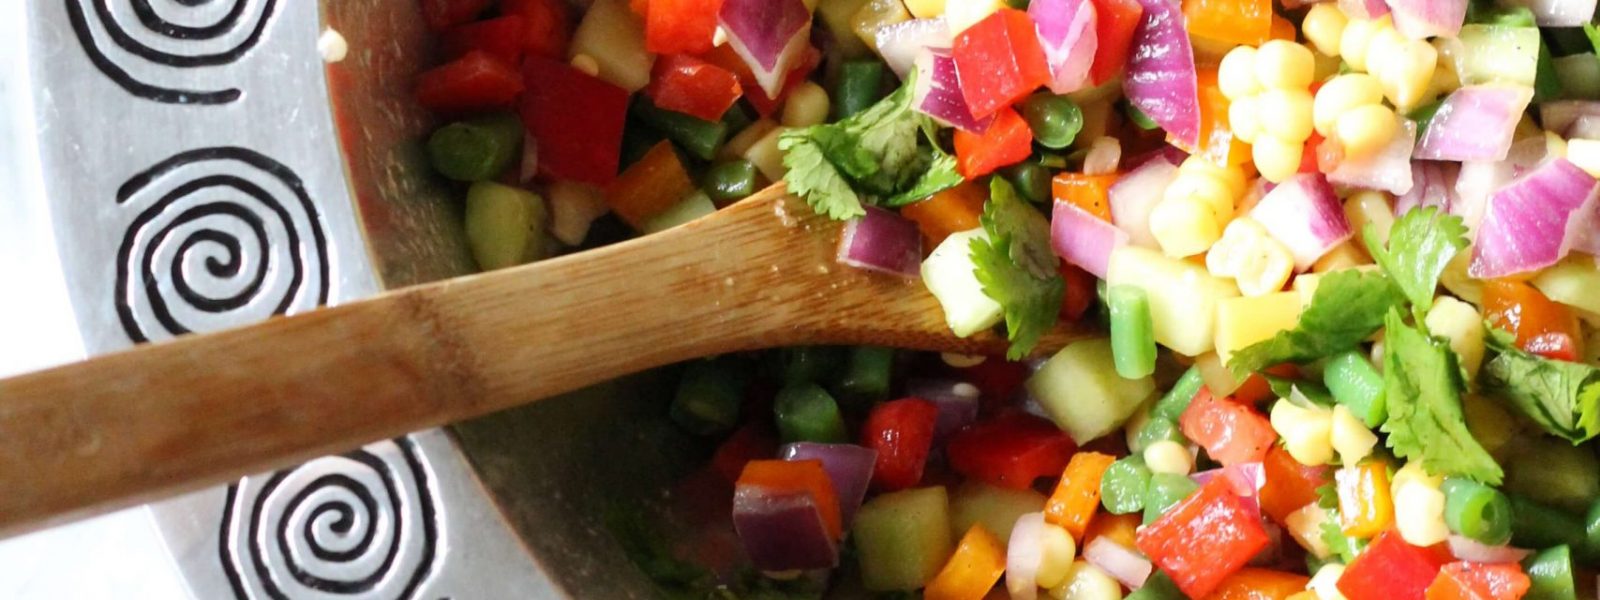 Martha Stewart's Chopped Vegetable Salad. The best mix of fresh veggies. Perfect for spring and summer parties!